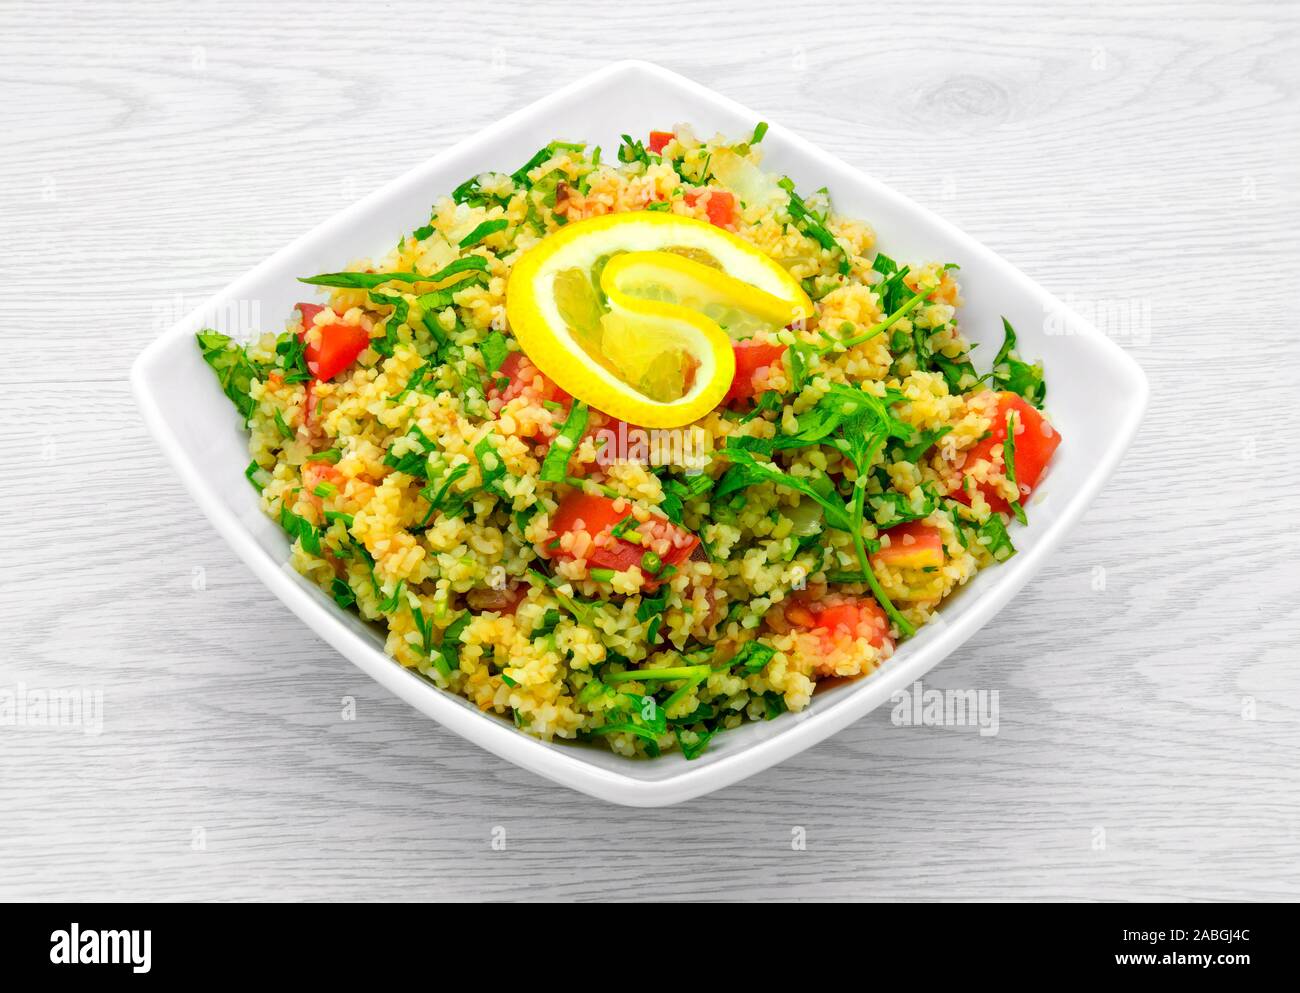 Dietary and fresh burgul salad on a light background. Stock Photo